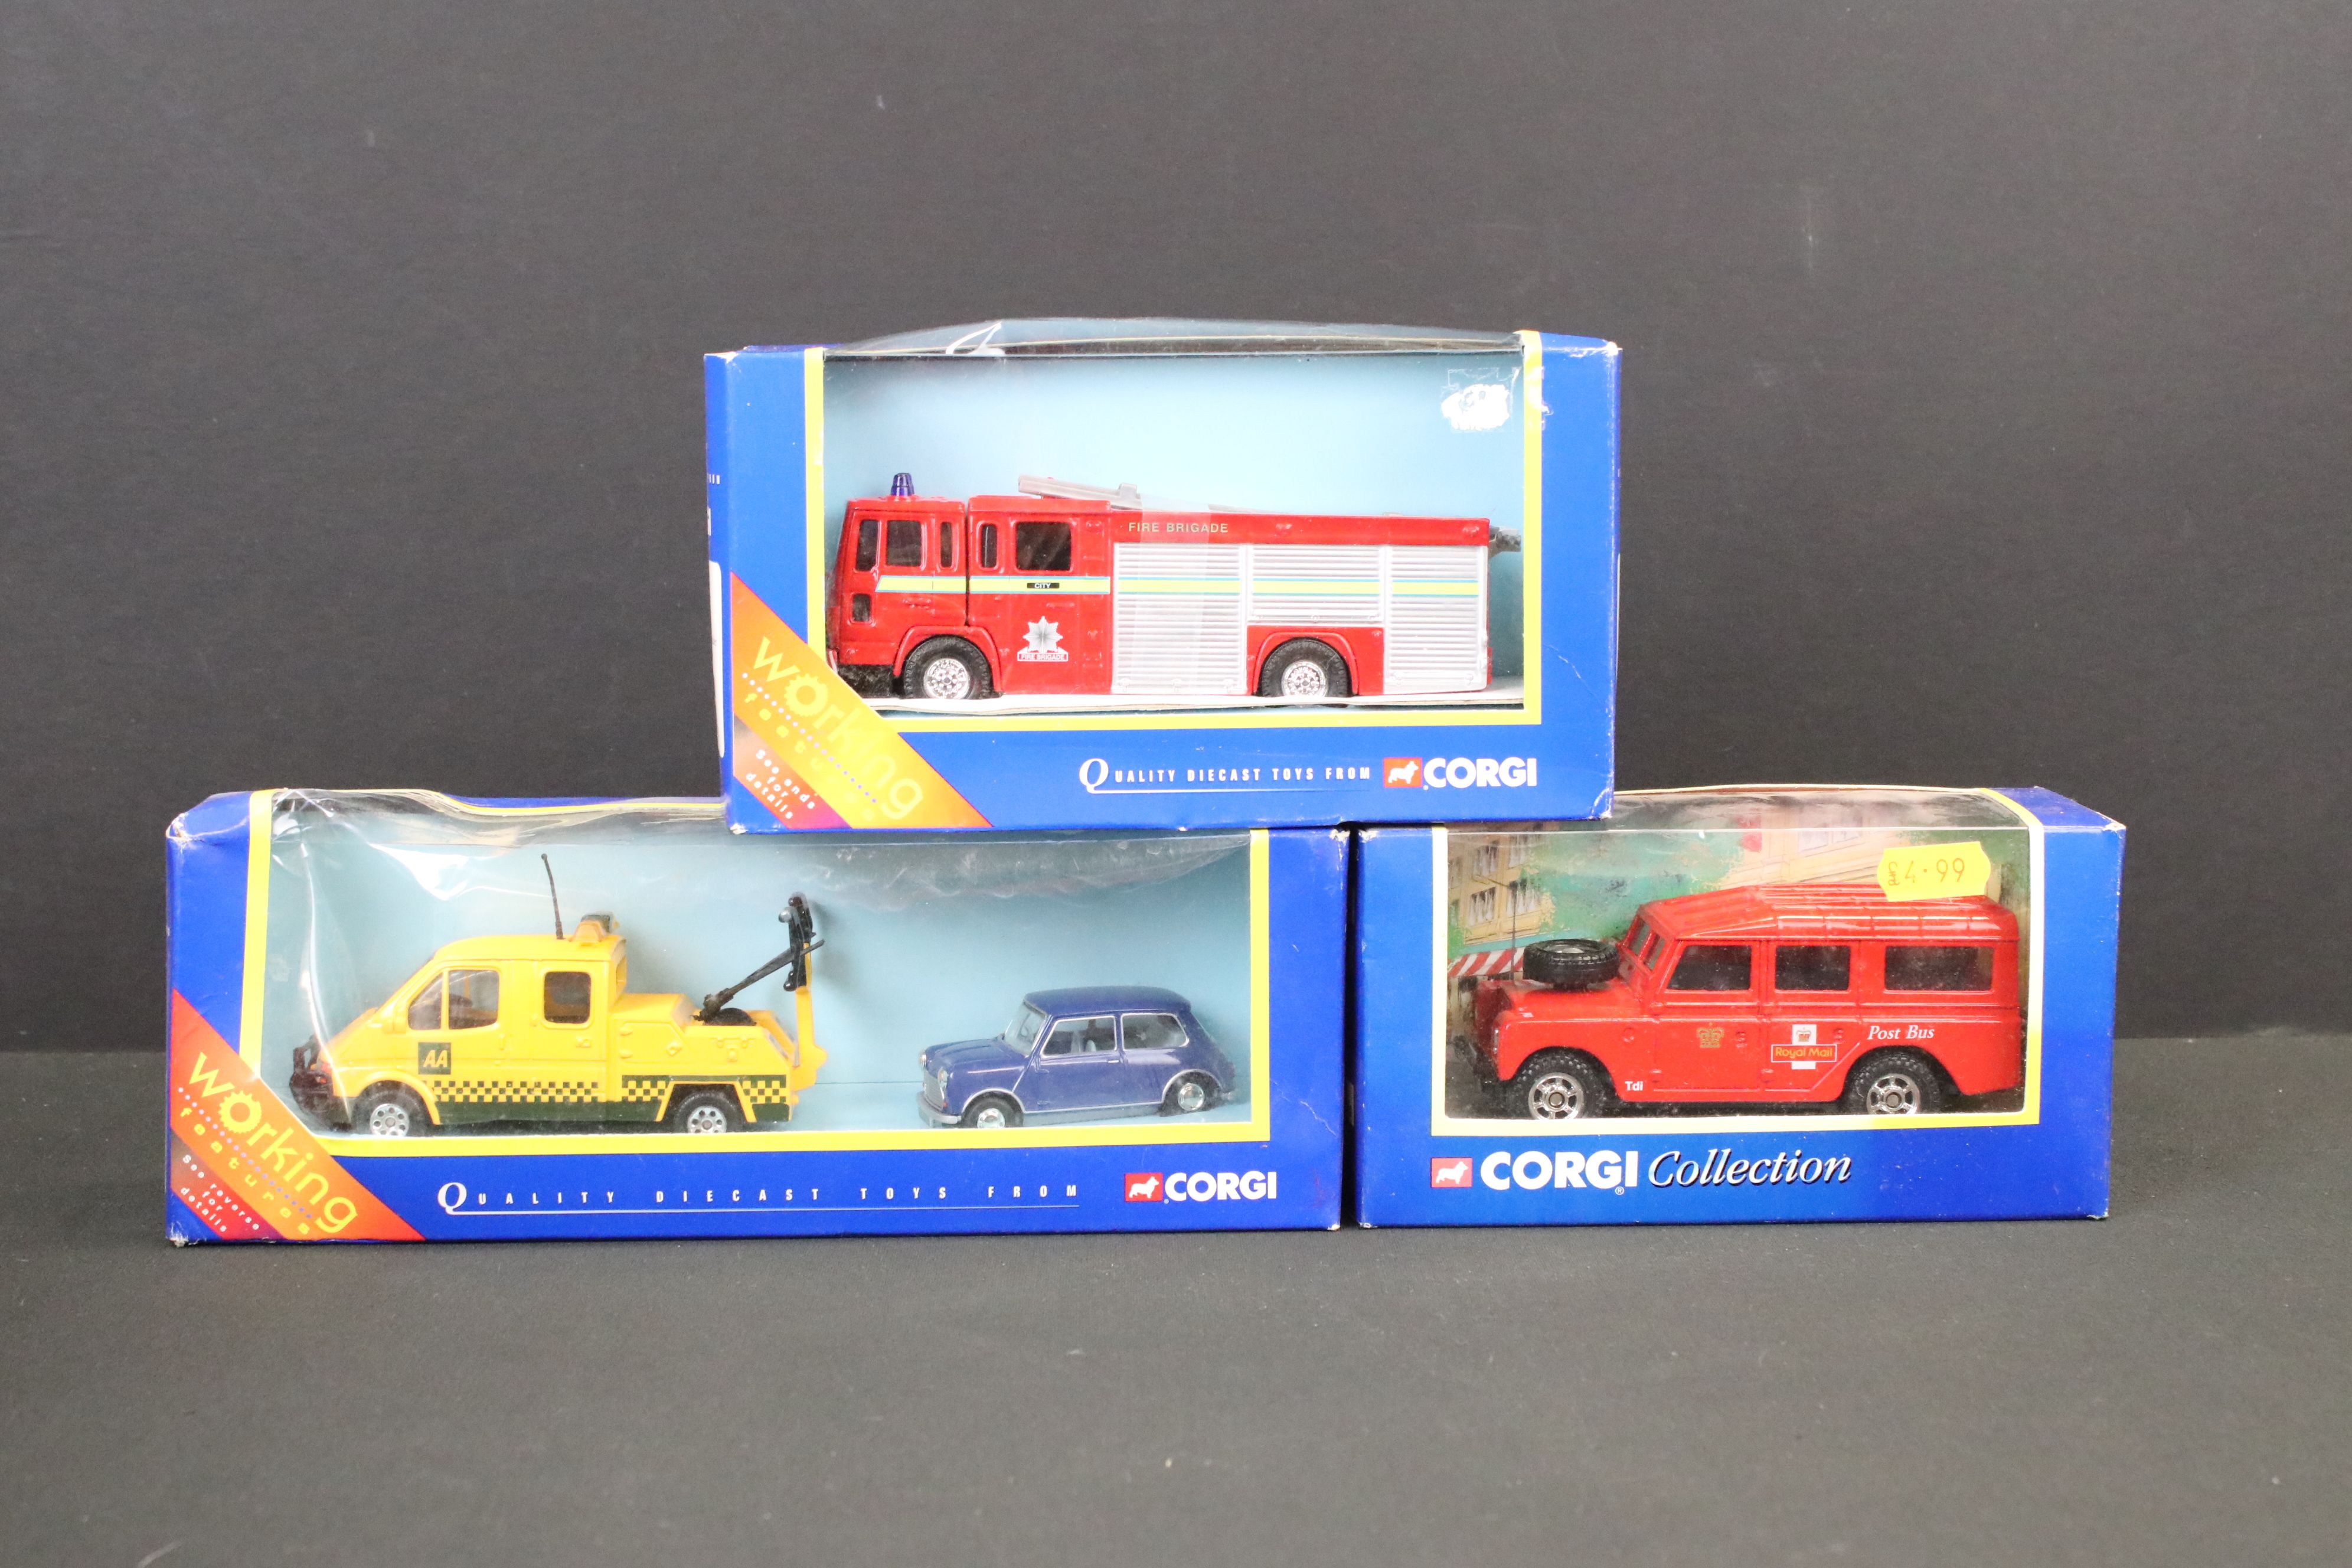 30 Boxed Corgi diecast models to include 3 x On The Move ltd edn 1:50 scale models (CC13307, - Image 4 of 6